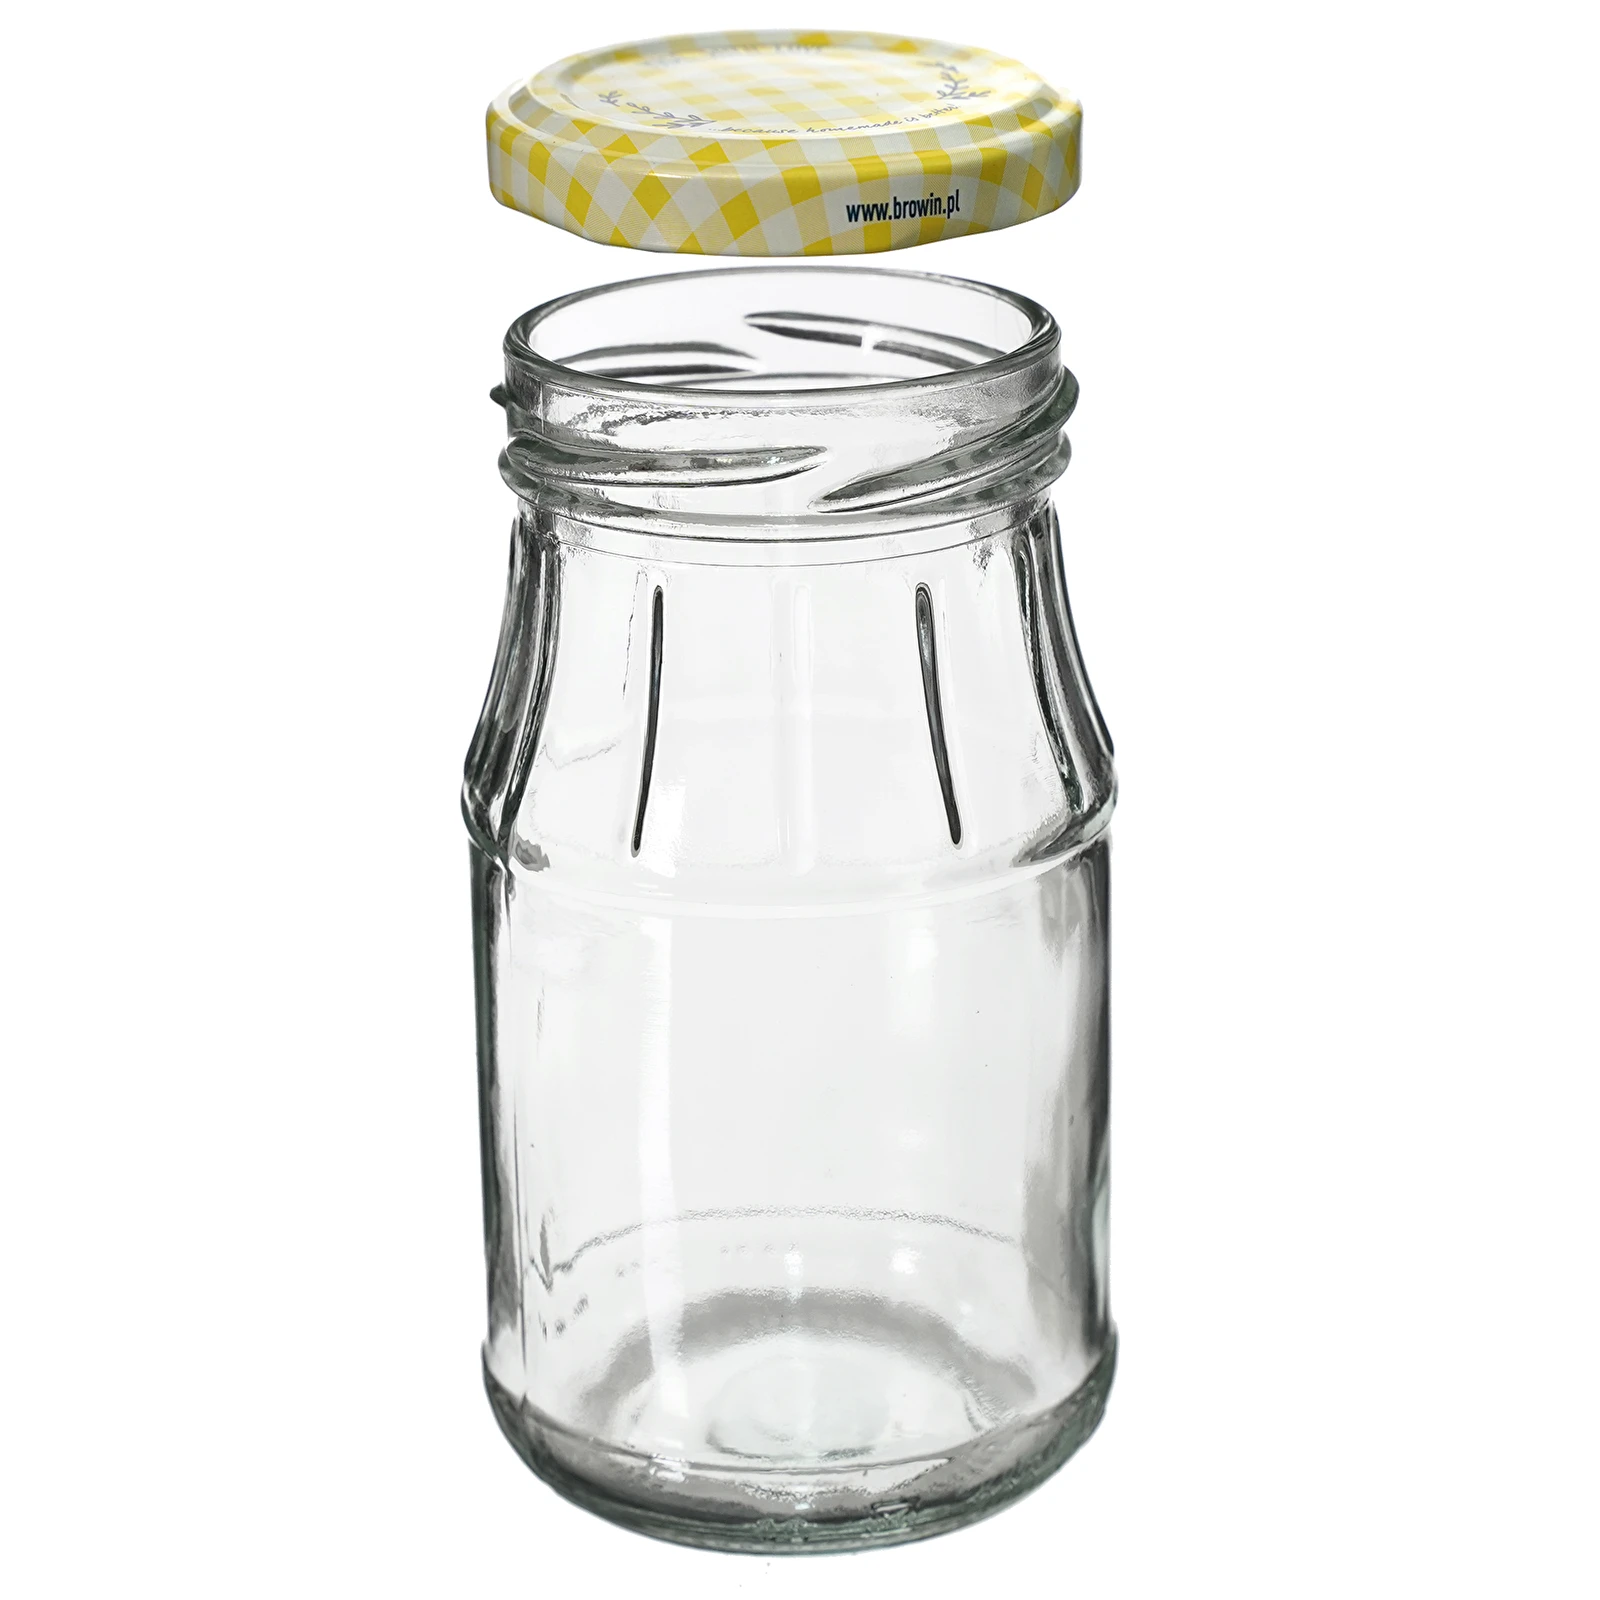 180ml Square Glass Jars With Lids